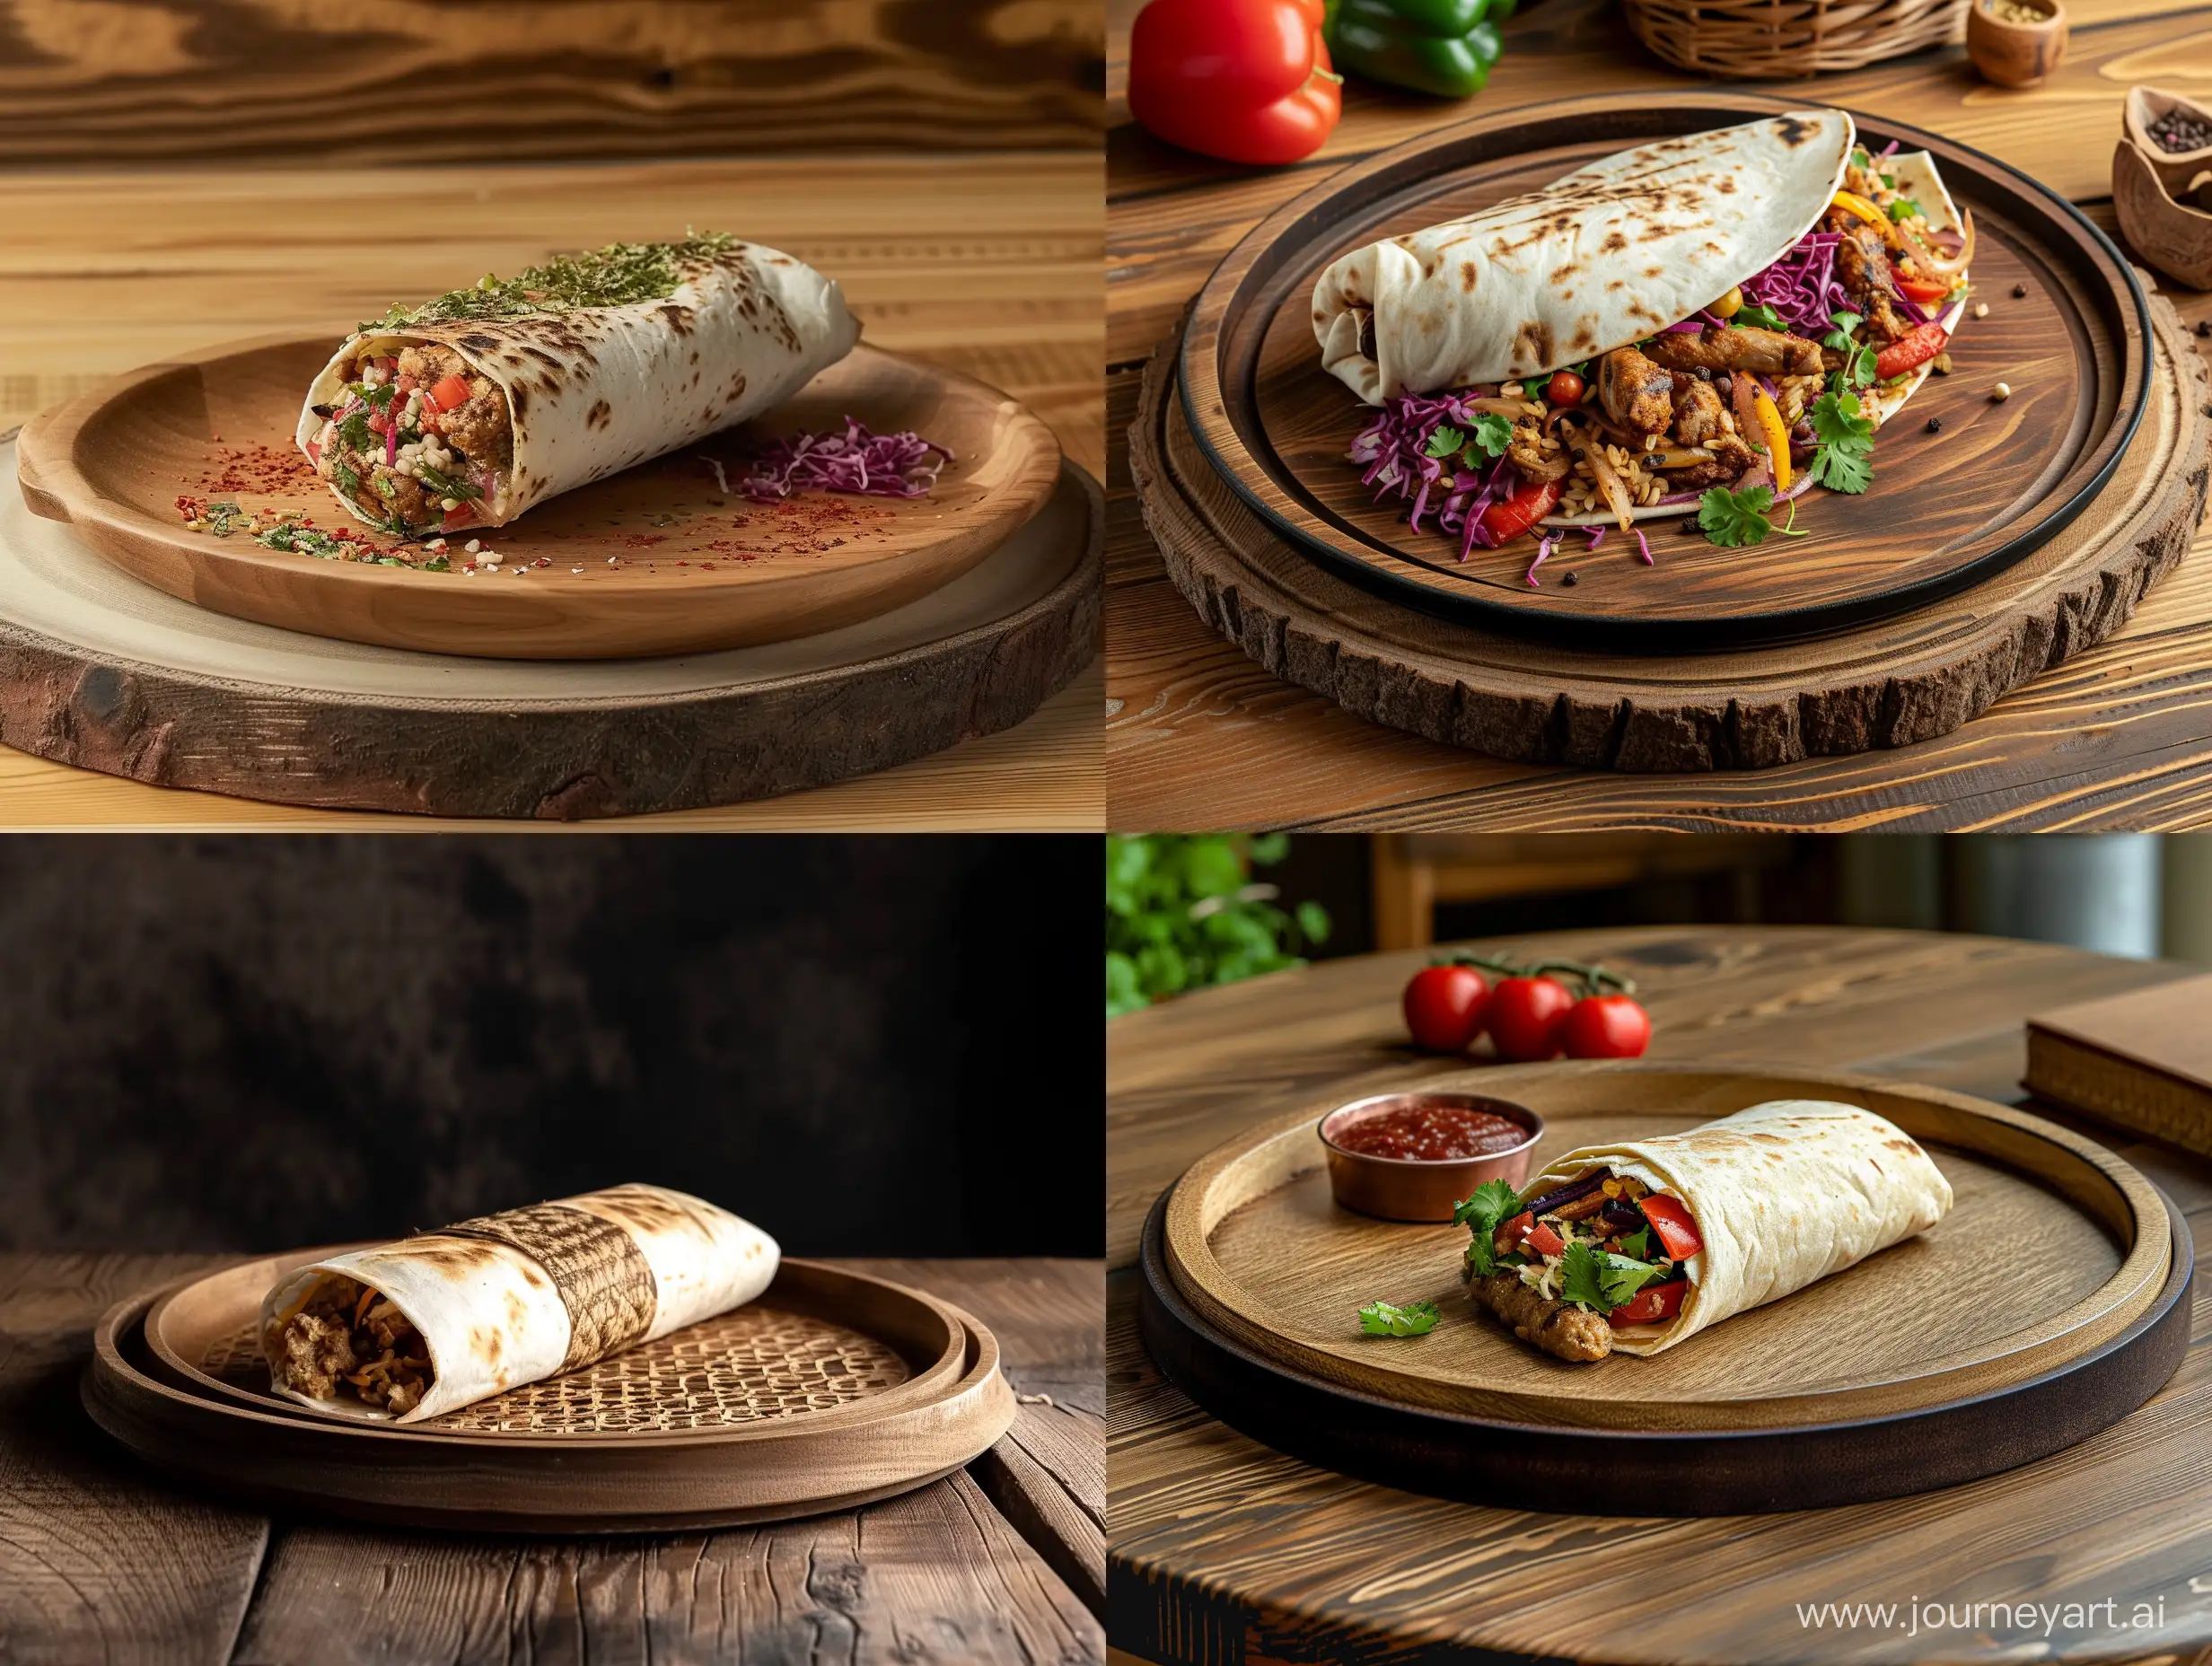 Delicious-Shawarma-Platter-on-Oak-Table-Gourmet-Food-Photography